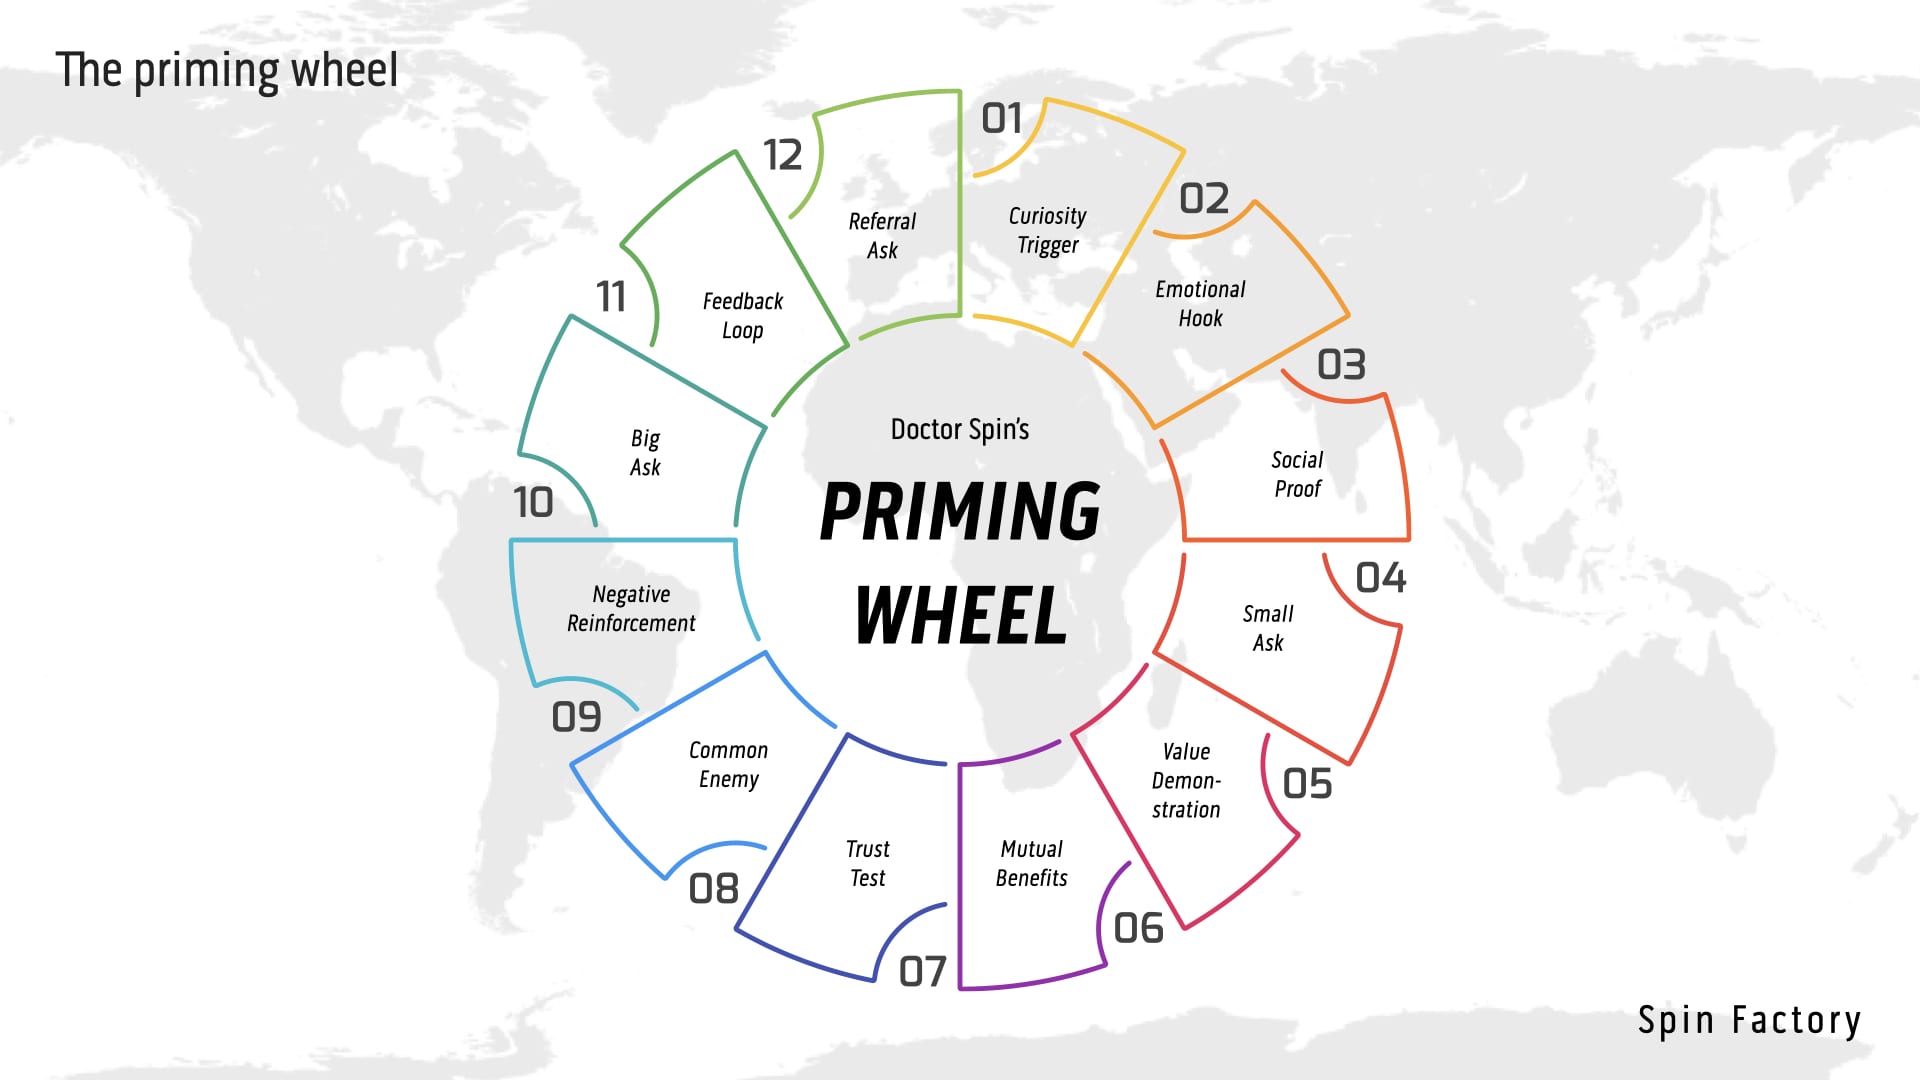 The priming wheel by Doctor Spin.